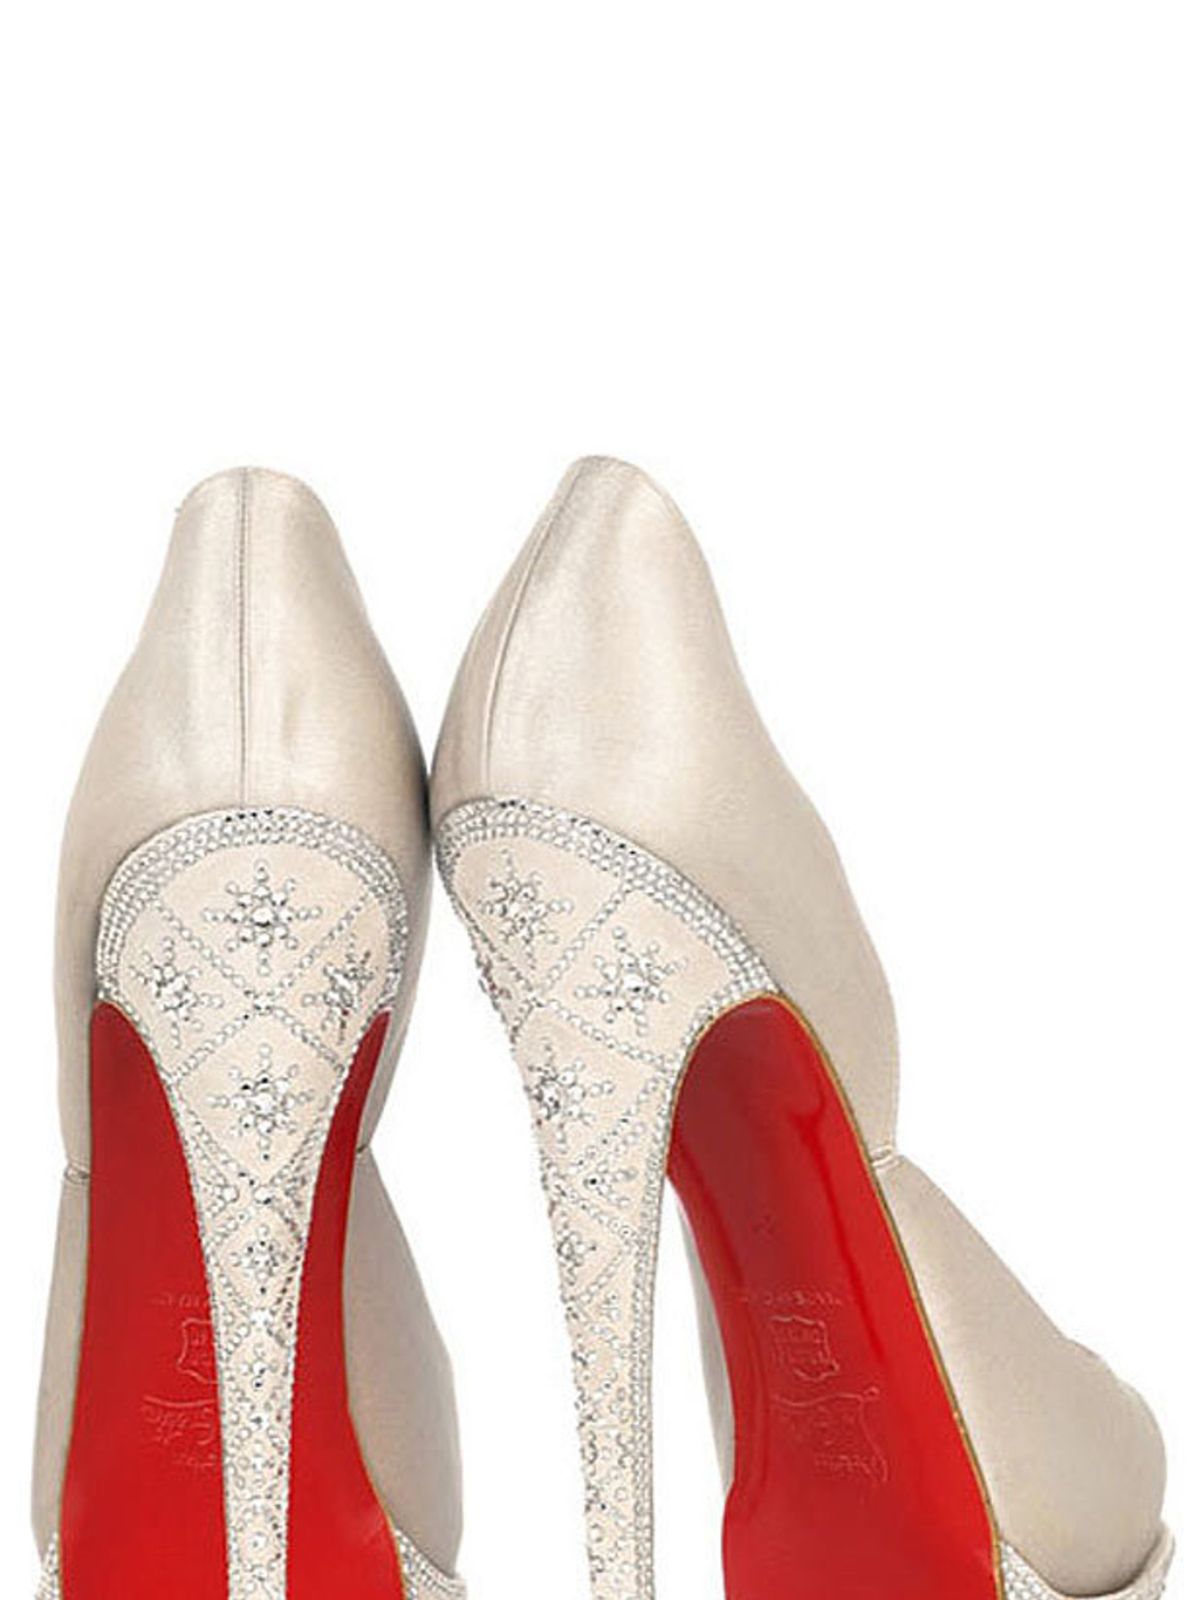 It&rsquo;s Louboutin shoes for the bride